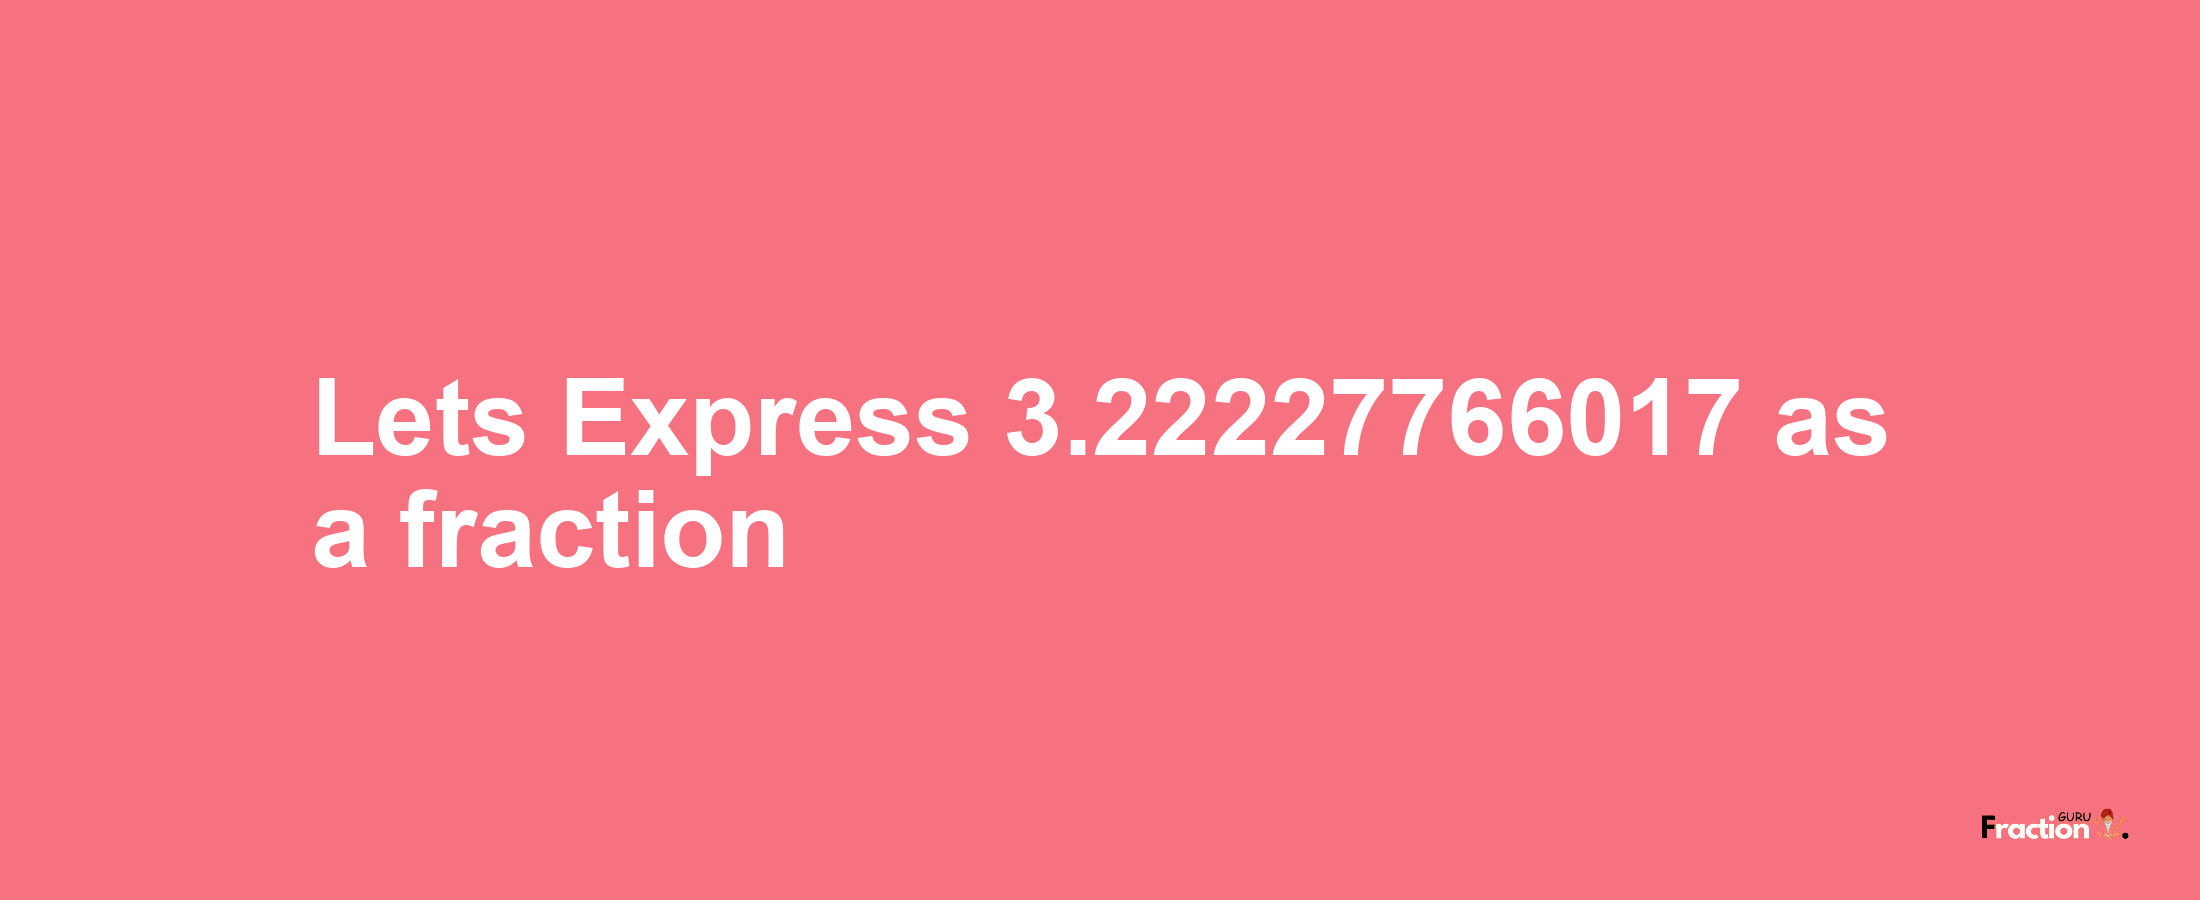 Lets Express 3.22227766017 as afraction